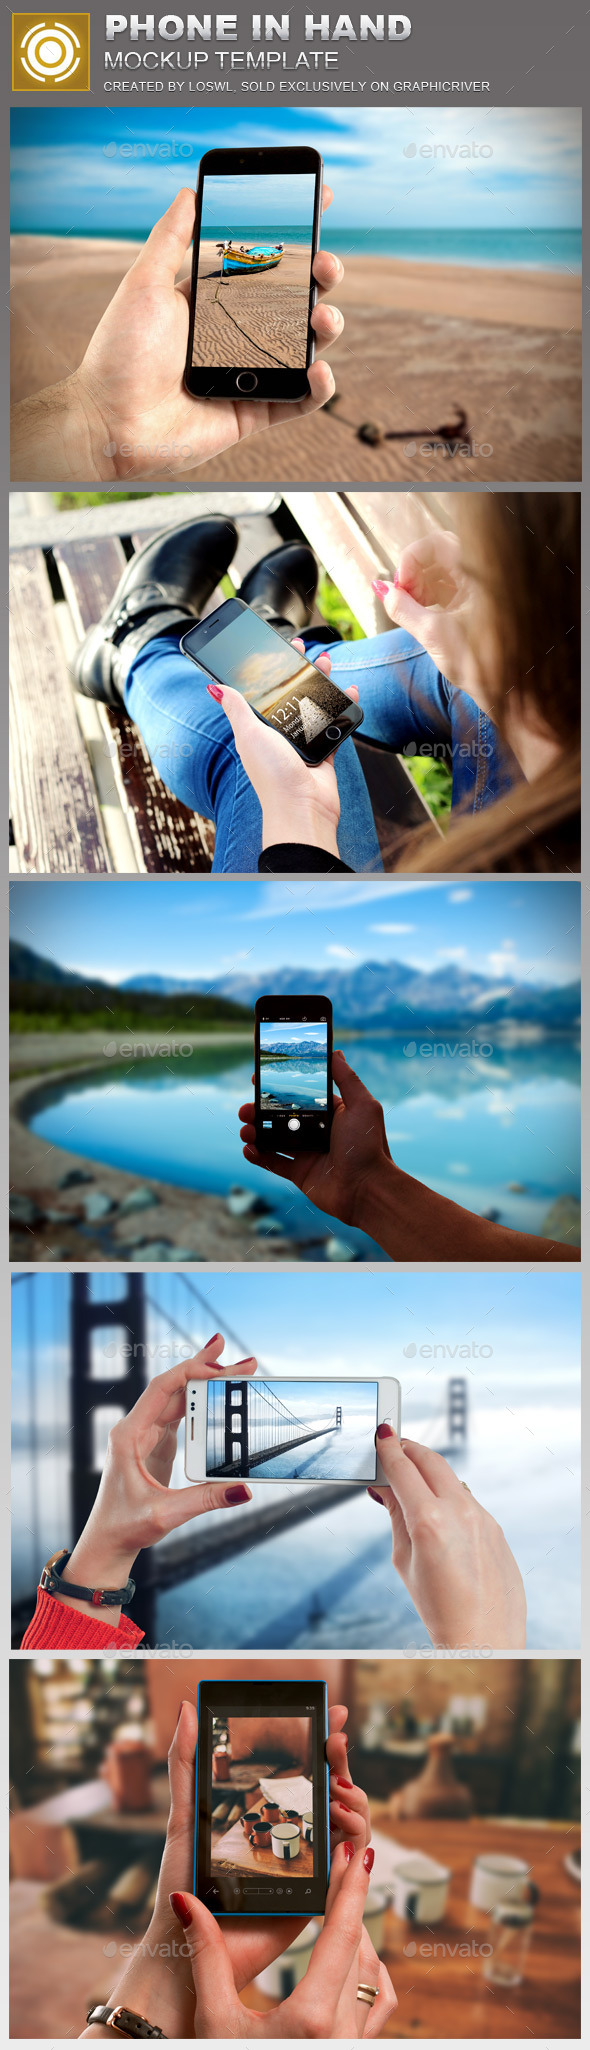 Phone in Hand Mockup Template